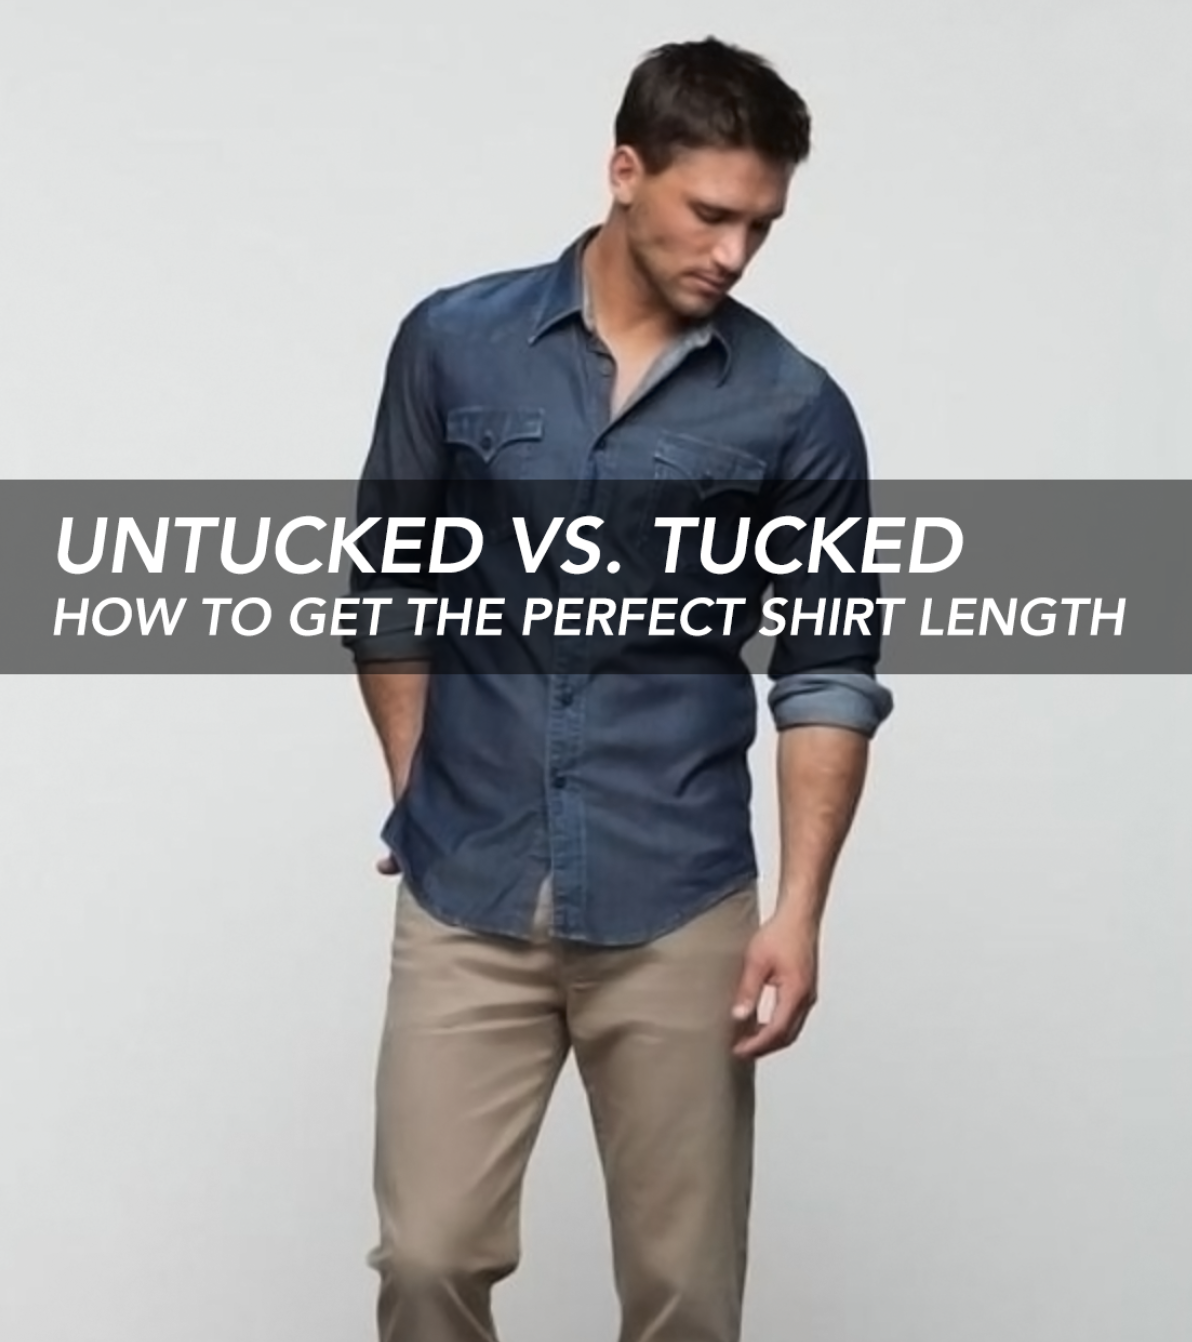 Deoveritas: Untucked vs. Tucked: How to Achieve the Perfect Shirt Length